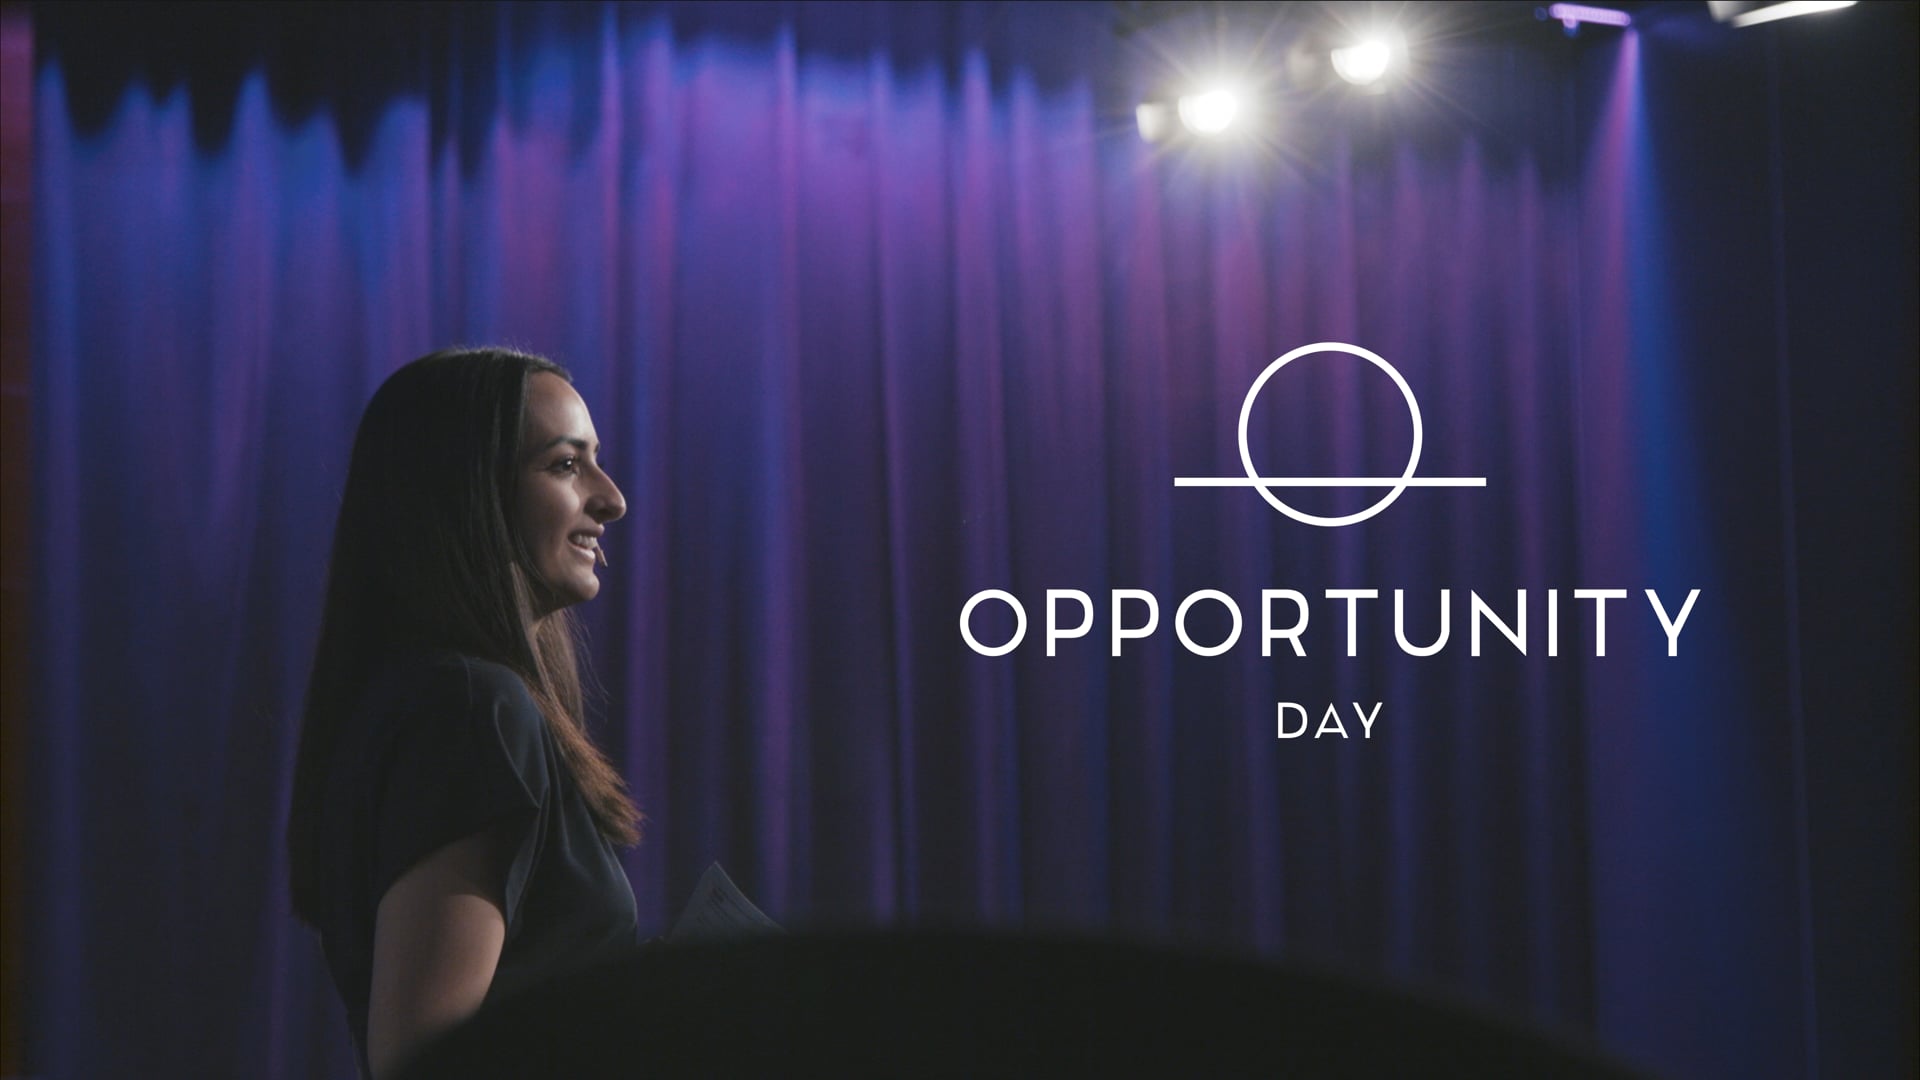 Opportunity-day 2019